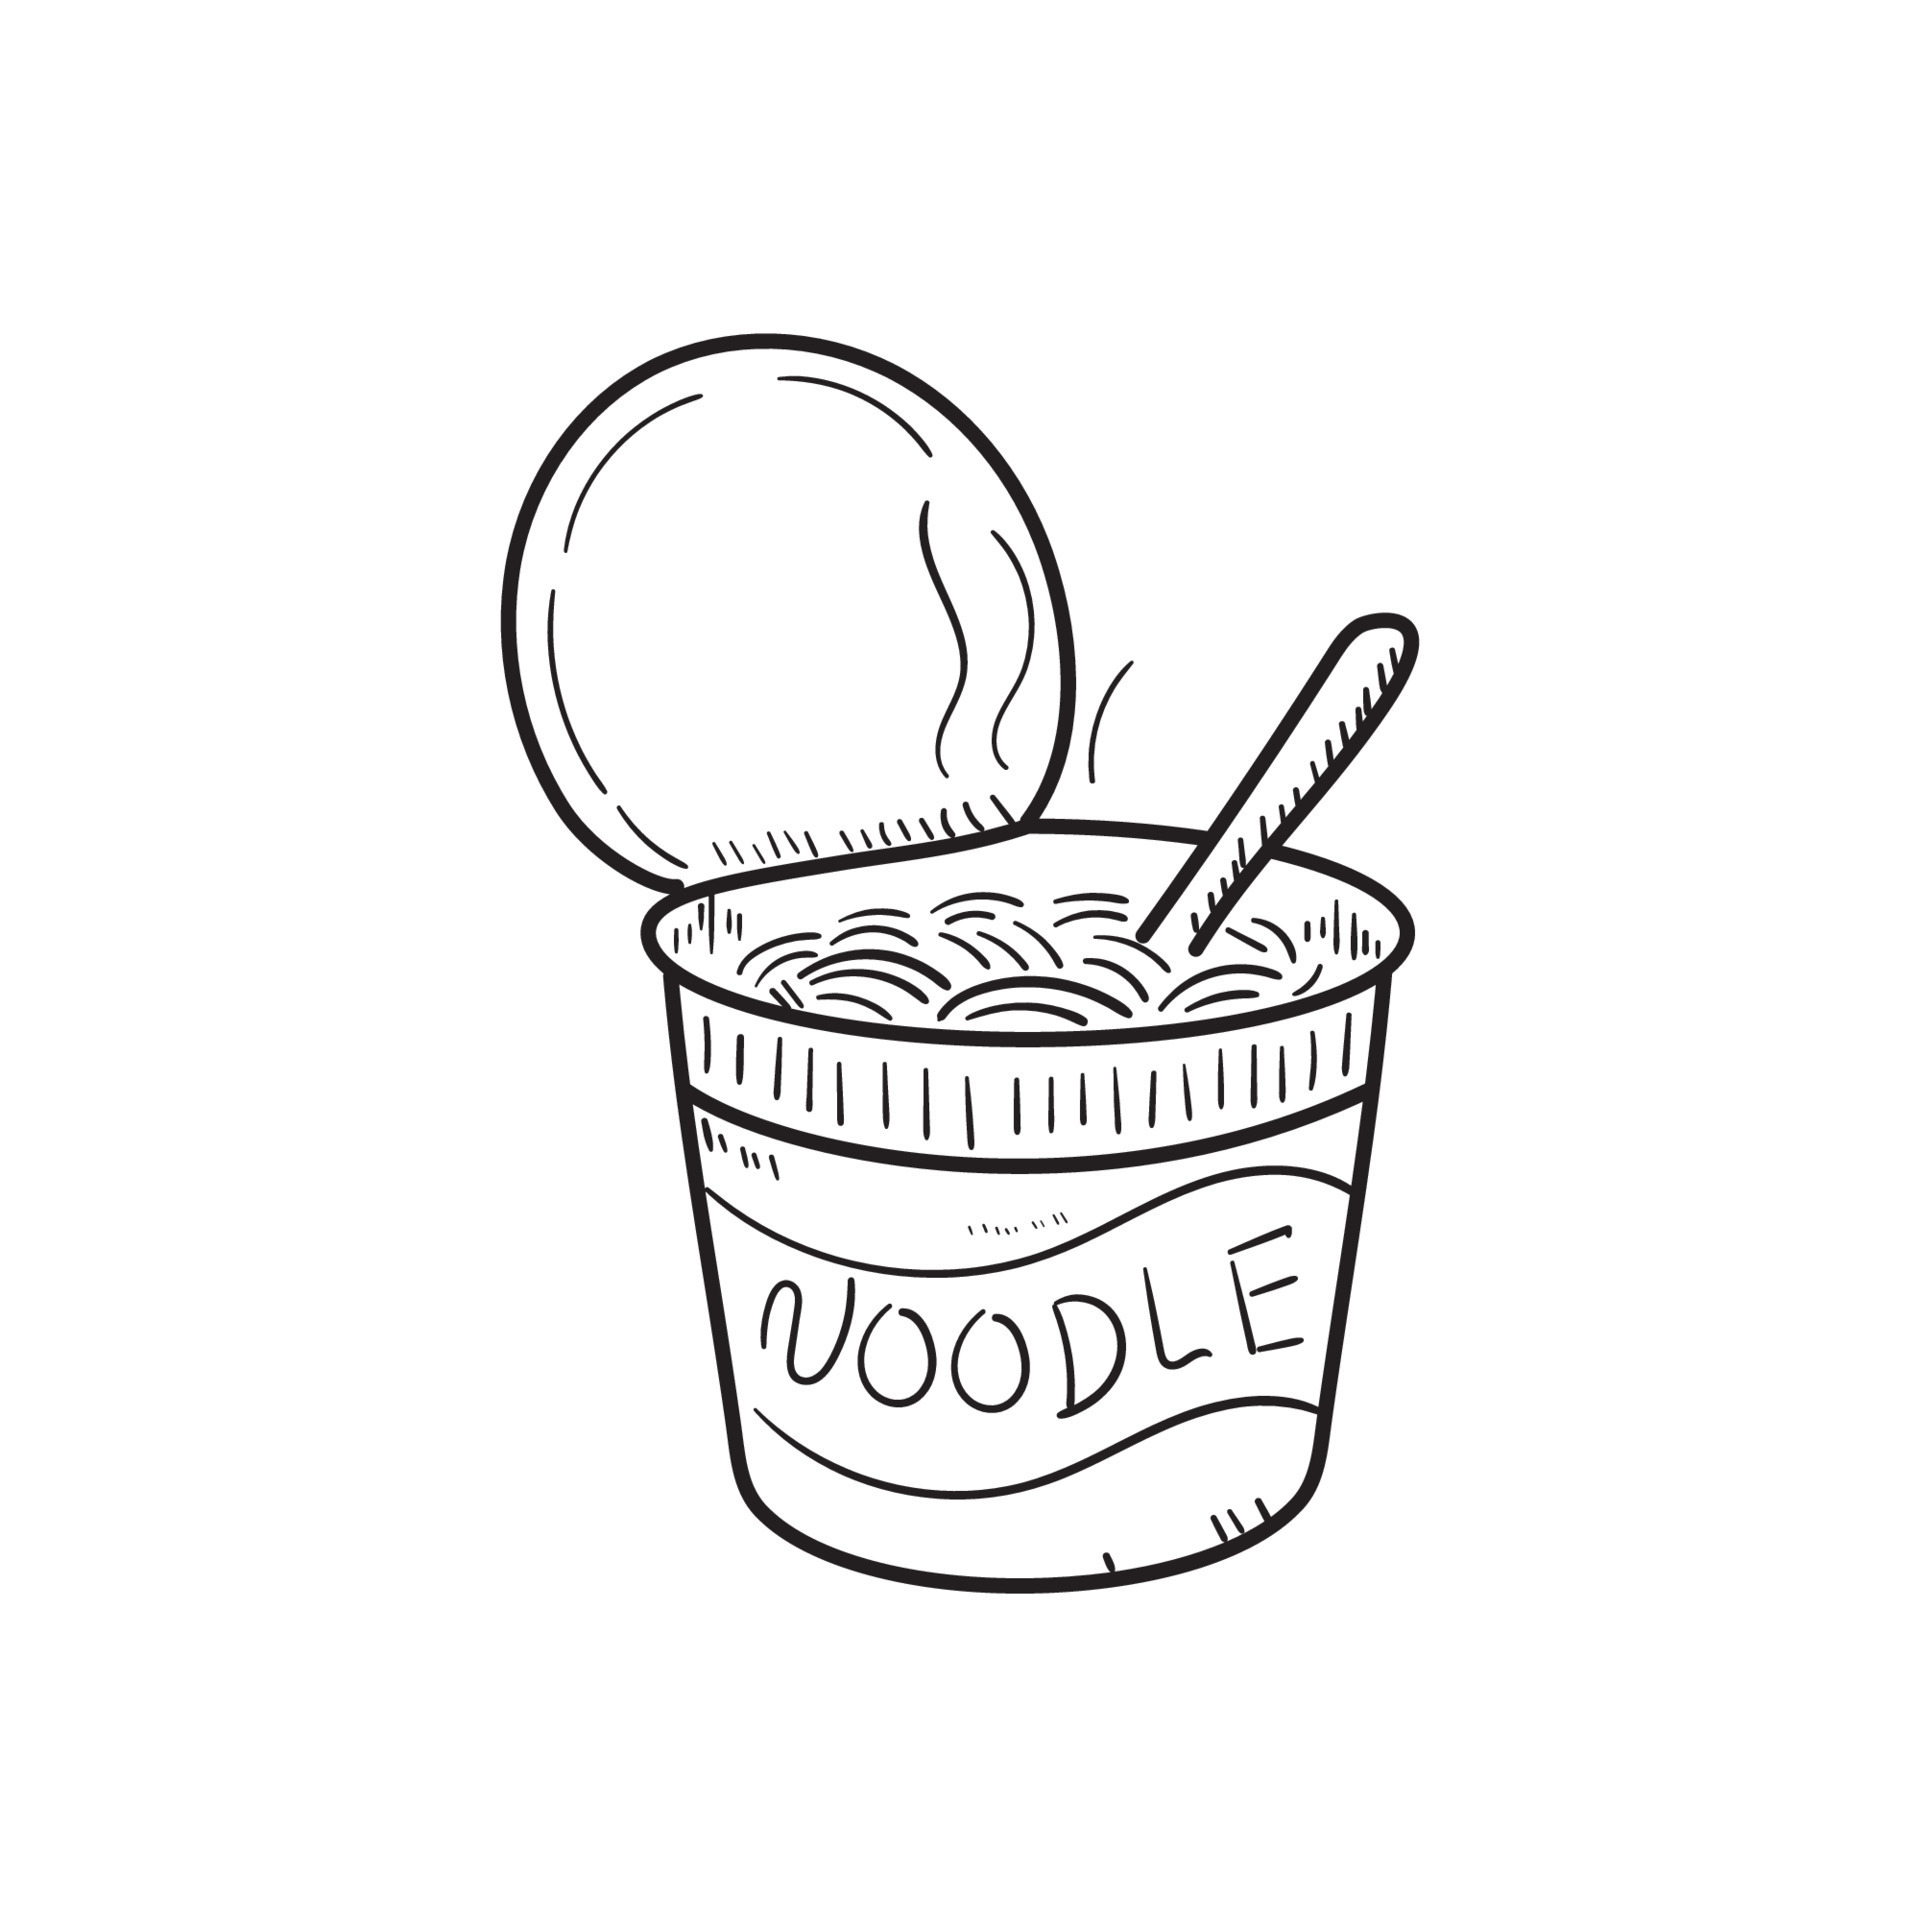 Egg noodle hand draw sketch Royalty Free Vector Image